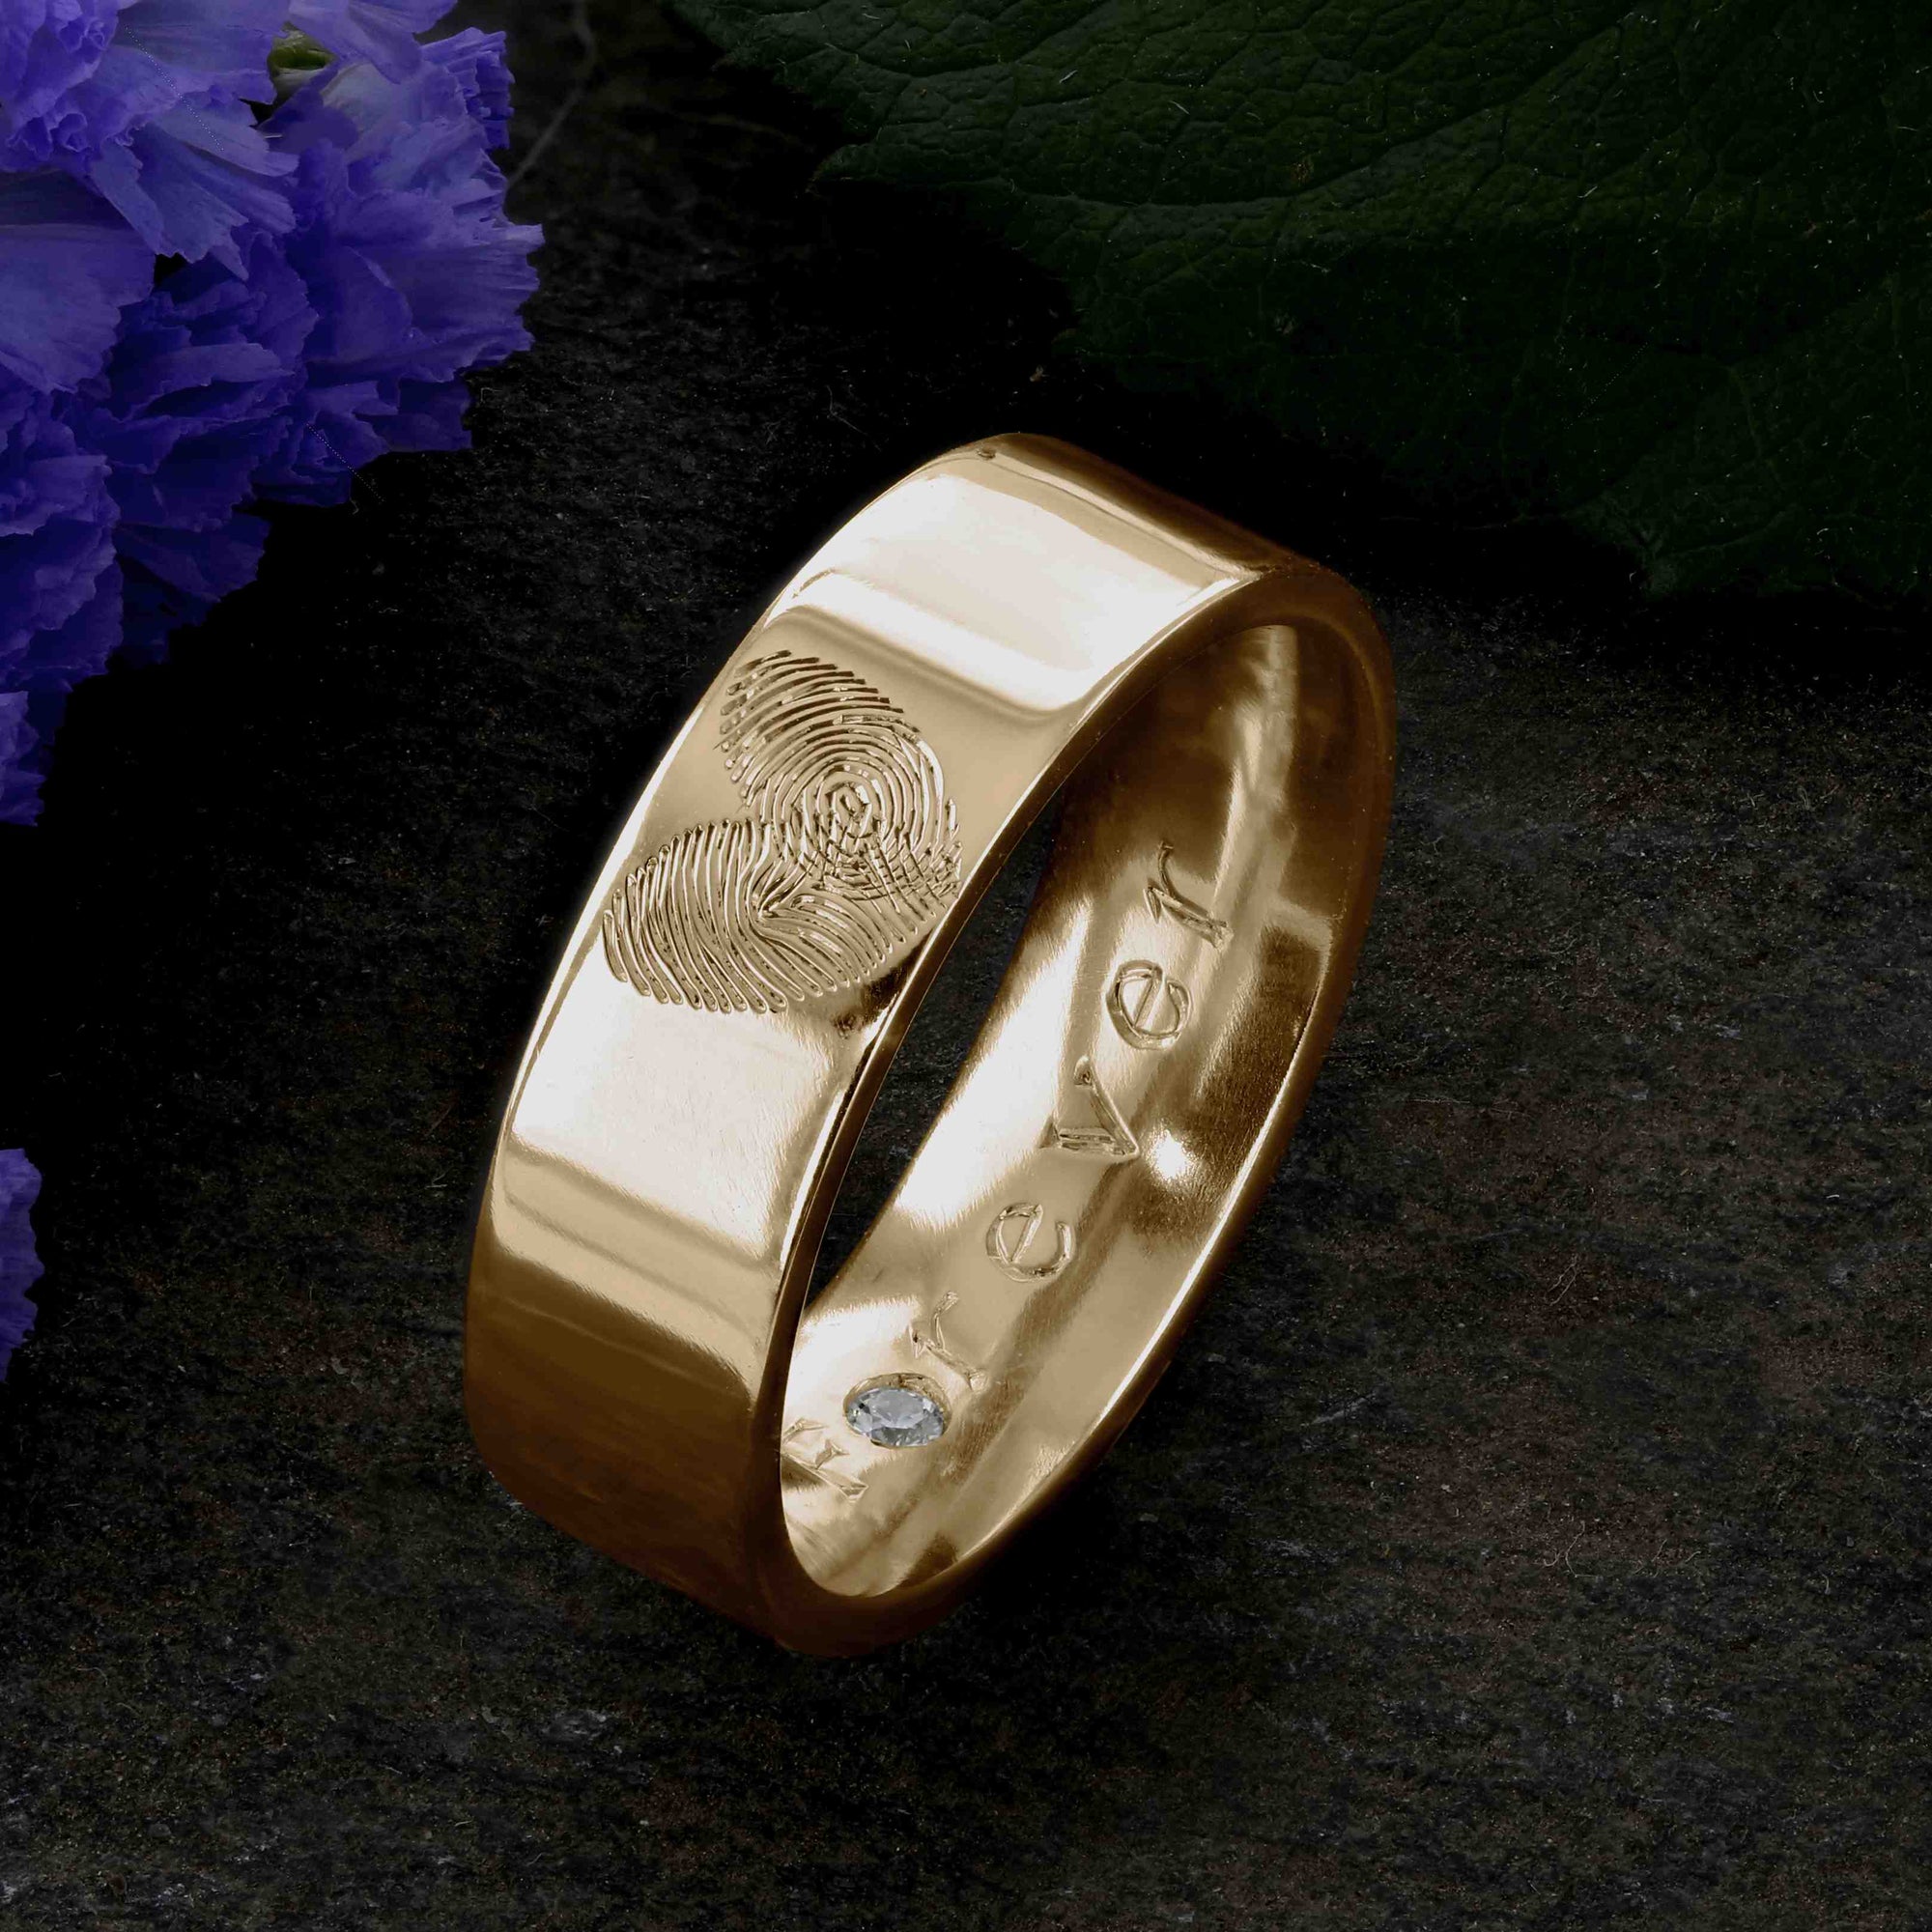 A Gold Wedding Ring with two fingerprints engraved in the shape of a heart on the outer surface | Engraved with  the word Forever on the inside of the ring | Set with a single diamond in the O of Forever | Hand engraving | Men's 6mm wide, comfort flat-court profile ring | Custom personalised wedding jewellery | Sophia Alexander Fingerprint Jewellery | Handmade in Suffolk UK